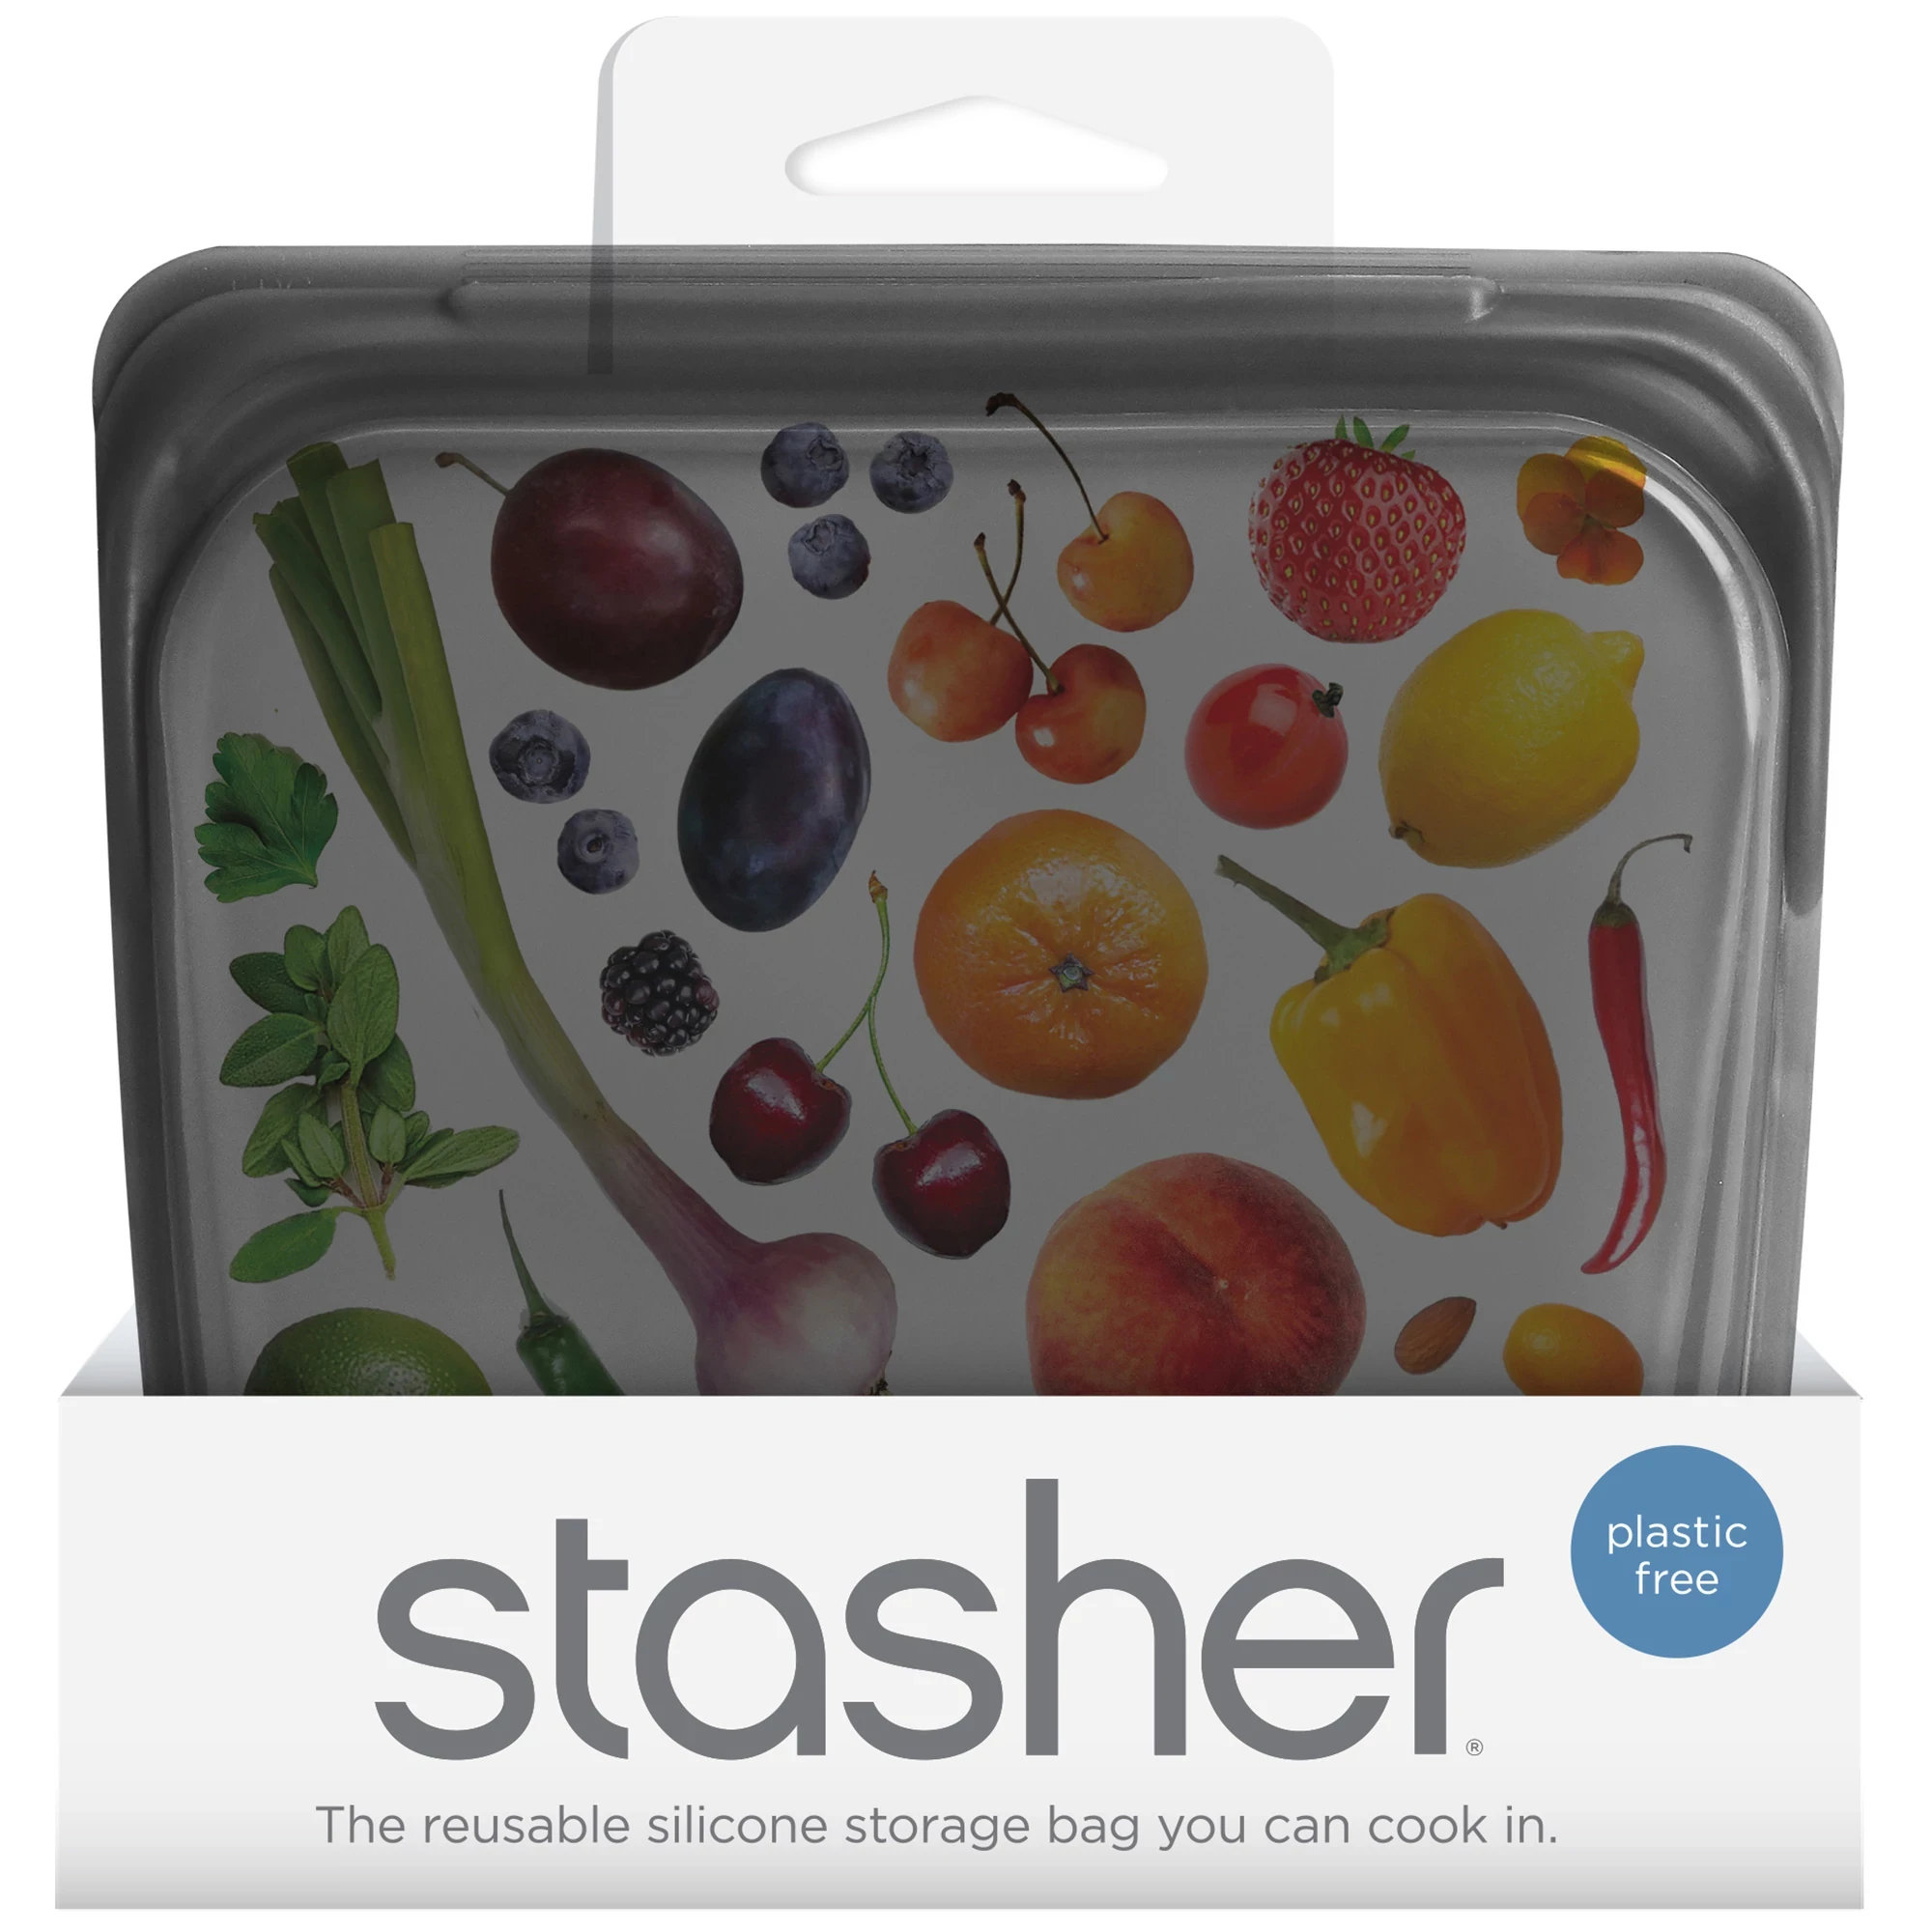 Ash Stasher Sandwich Bag in product packaging